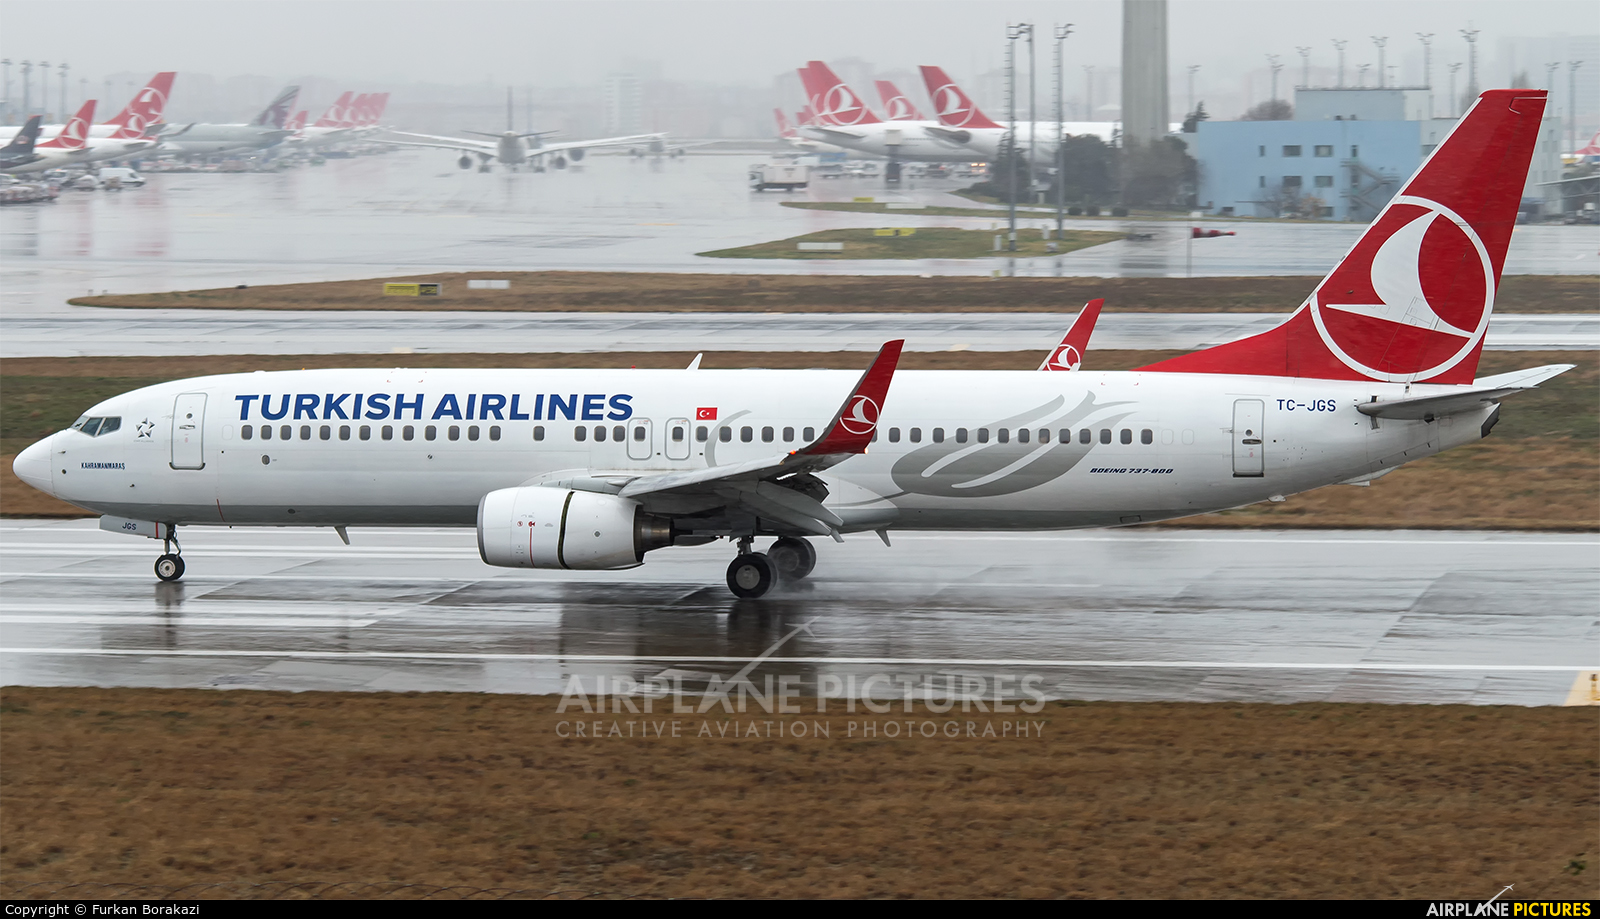 Competencia desleal turkish airlines boeing 737-800 // 1:200 incl soporte OVP TC-jfu/PPC 